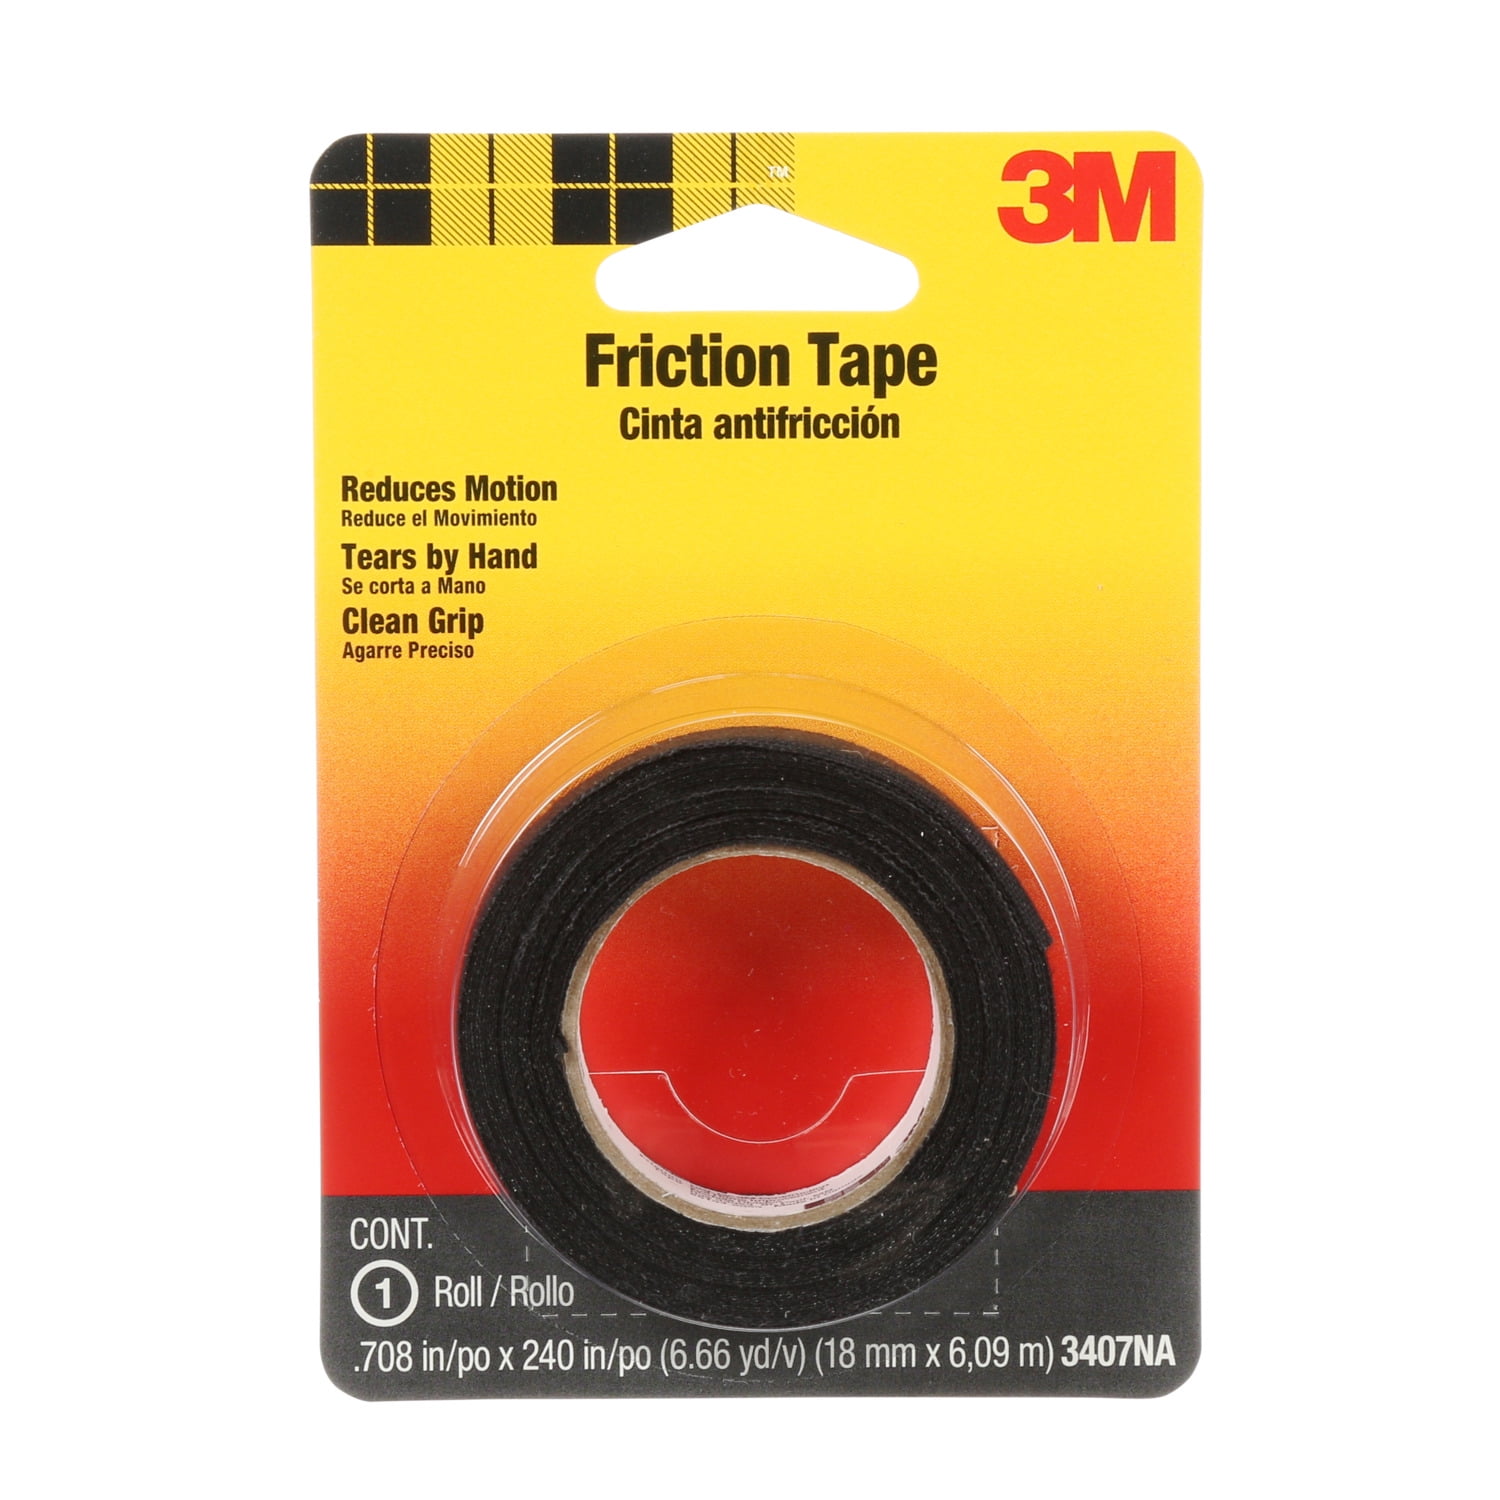 3M Friction Tape, Black, .708-Inch x 240-Inch, 3407NA1, Roll/Pack